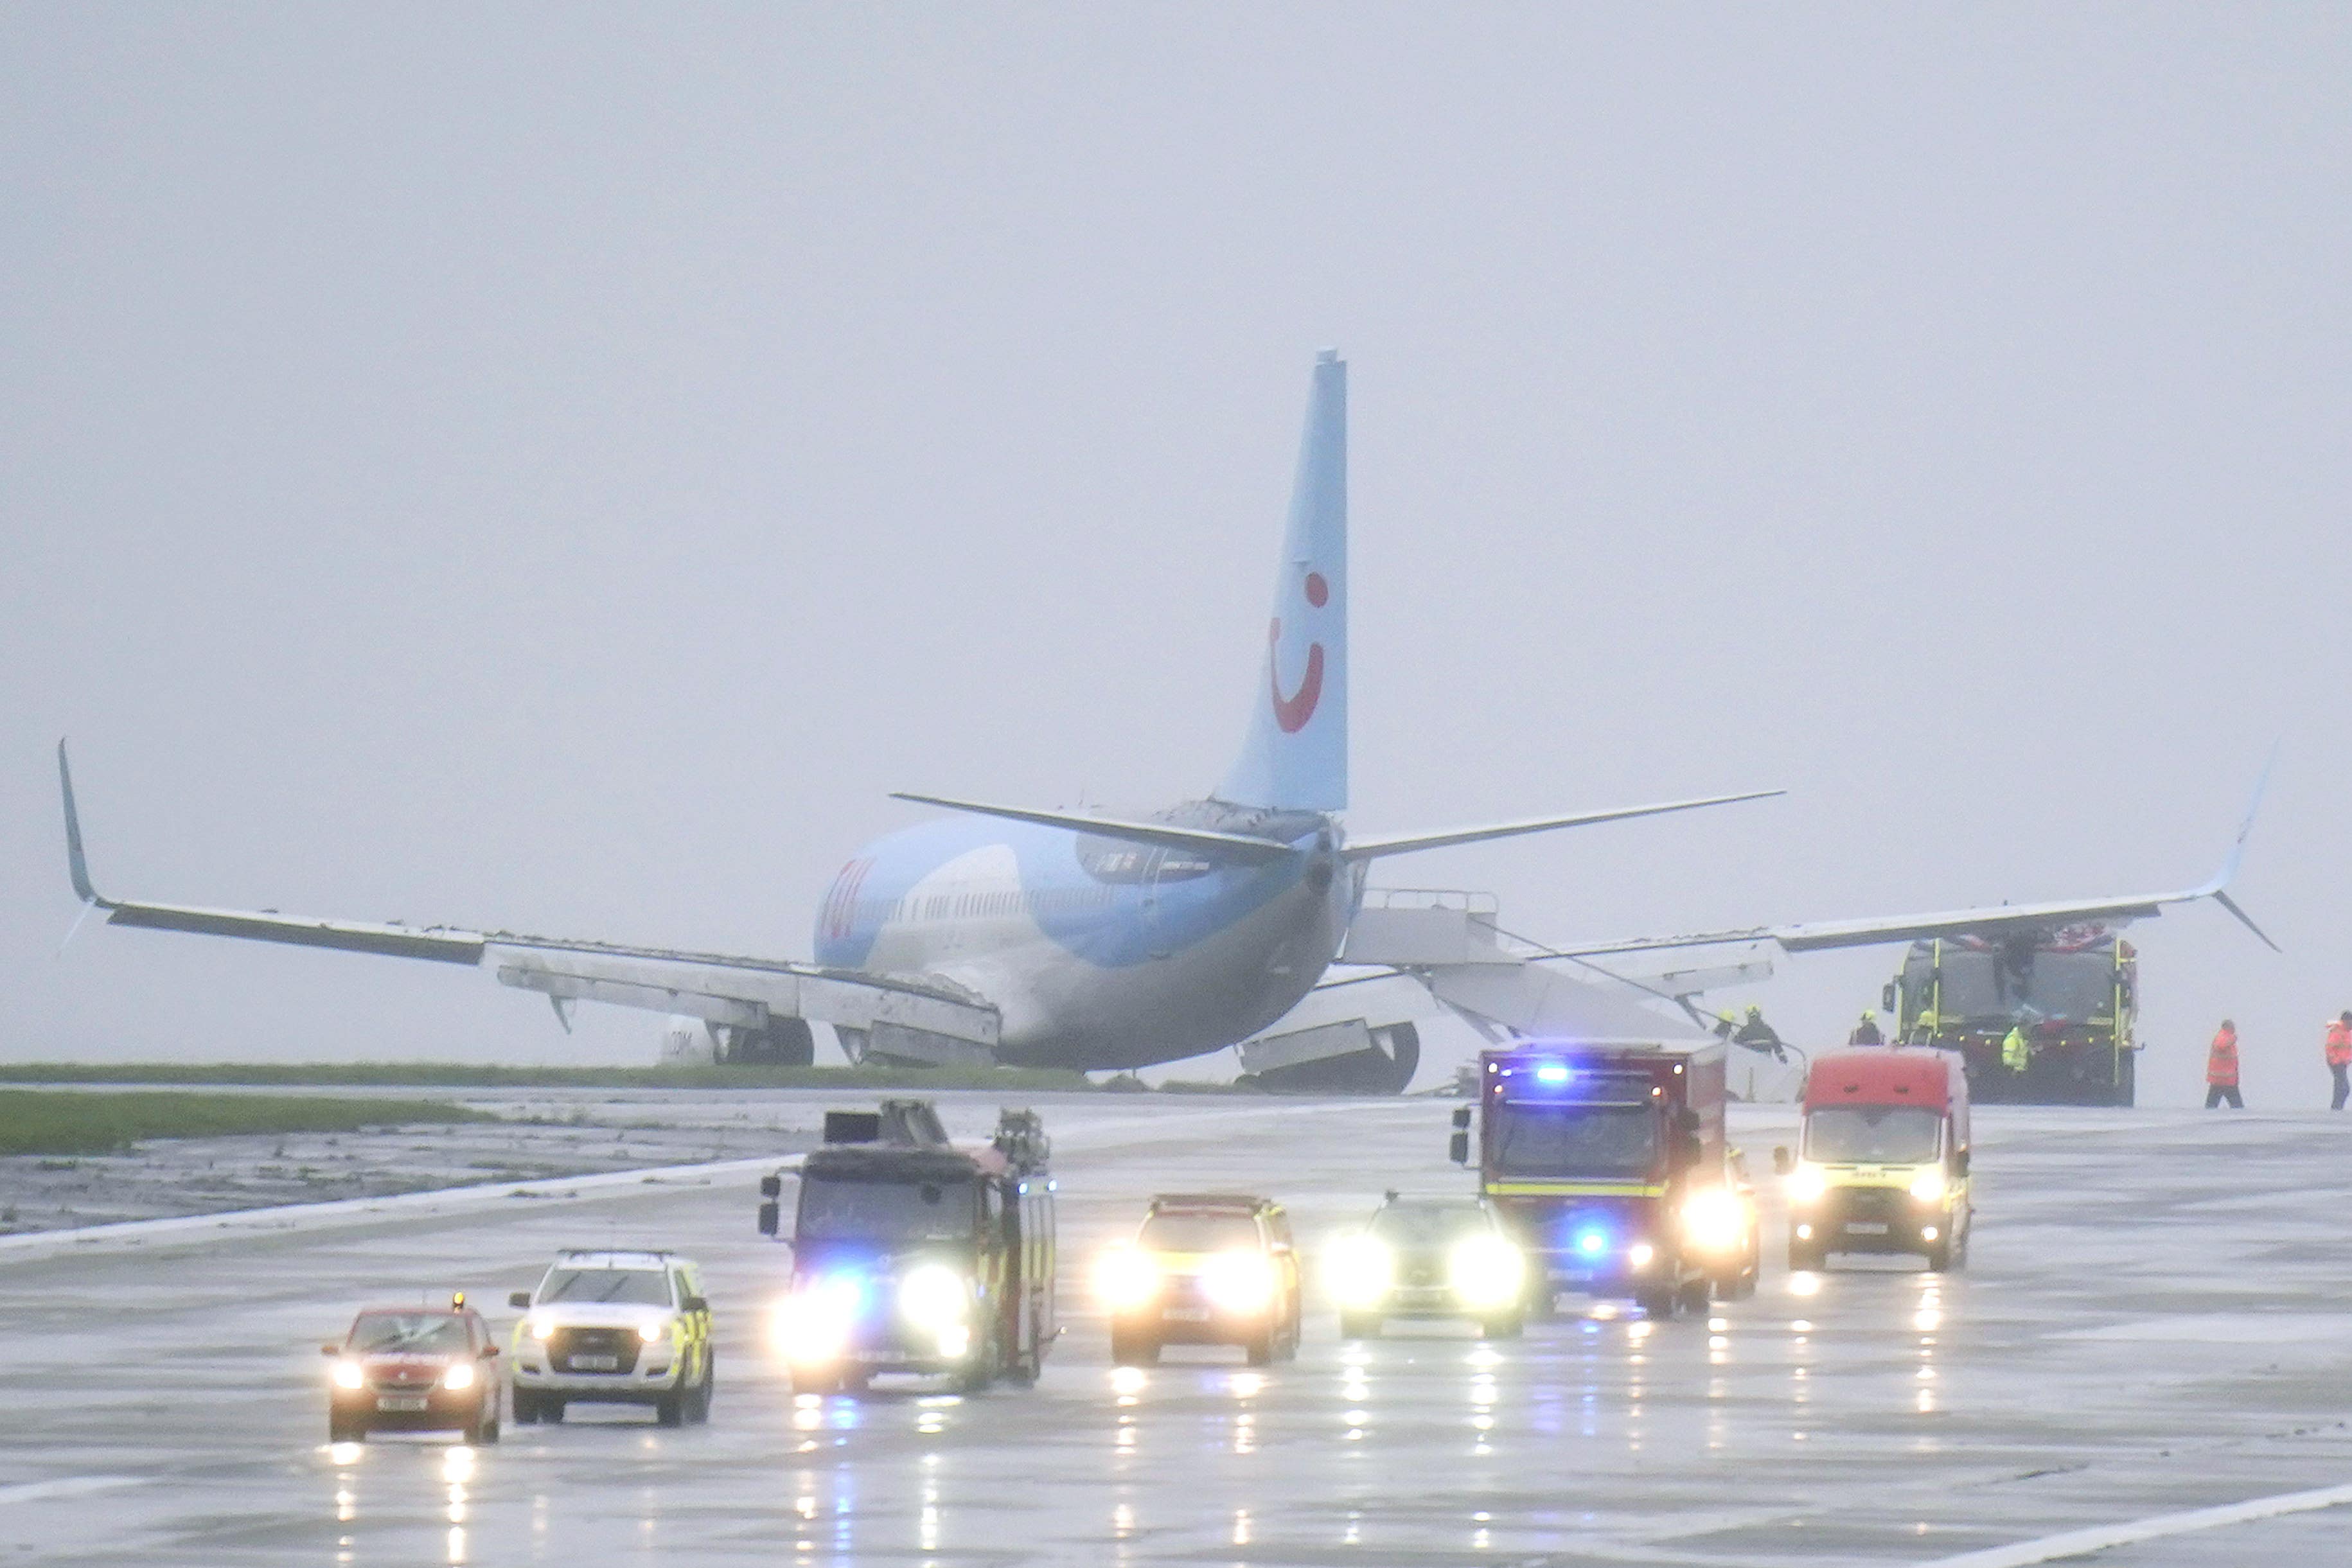 <p>Emergency services at the scene after a passenger plane came off the runway at Leeds Bradford Airport while landing in windy conditions during Storm Babet</p>